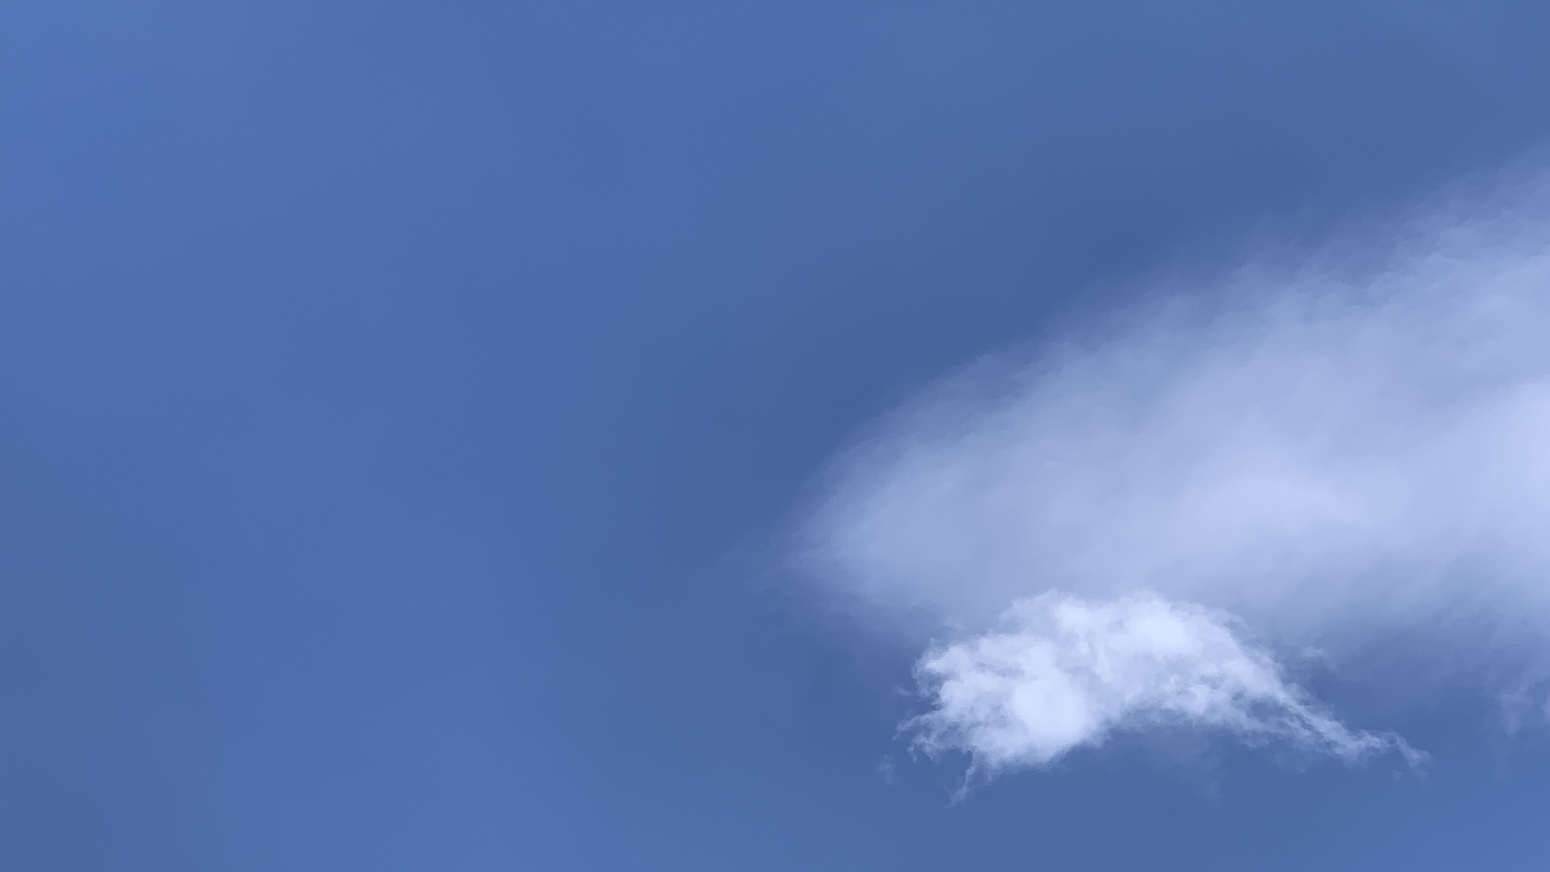 A smudgy cloud behind a little wispy cloud against lots of blue sky